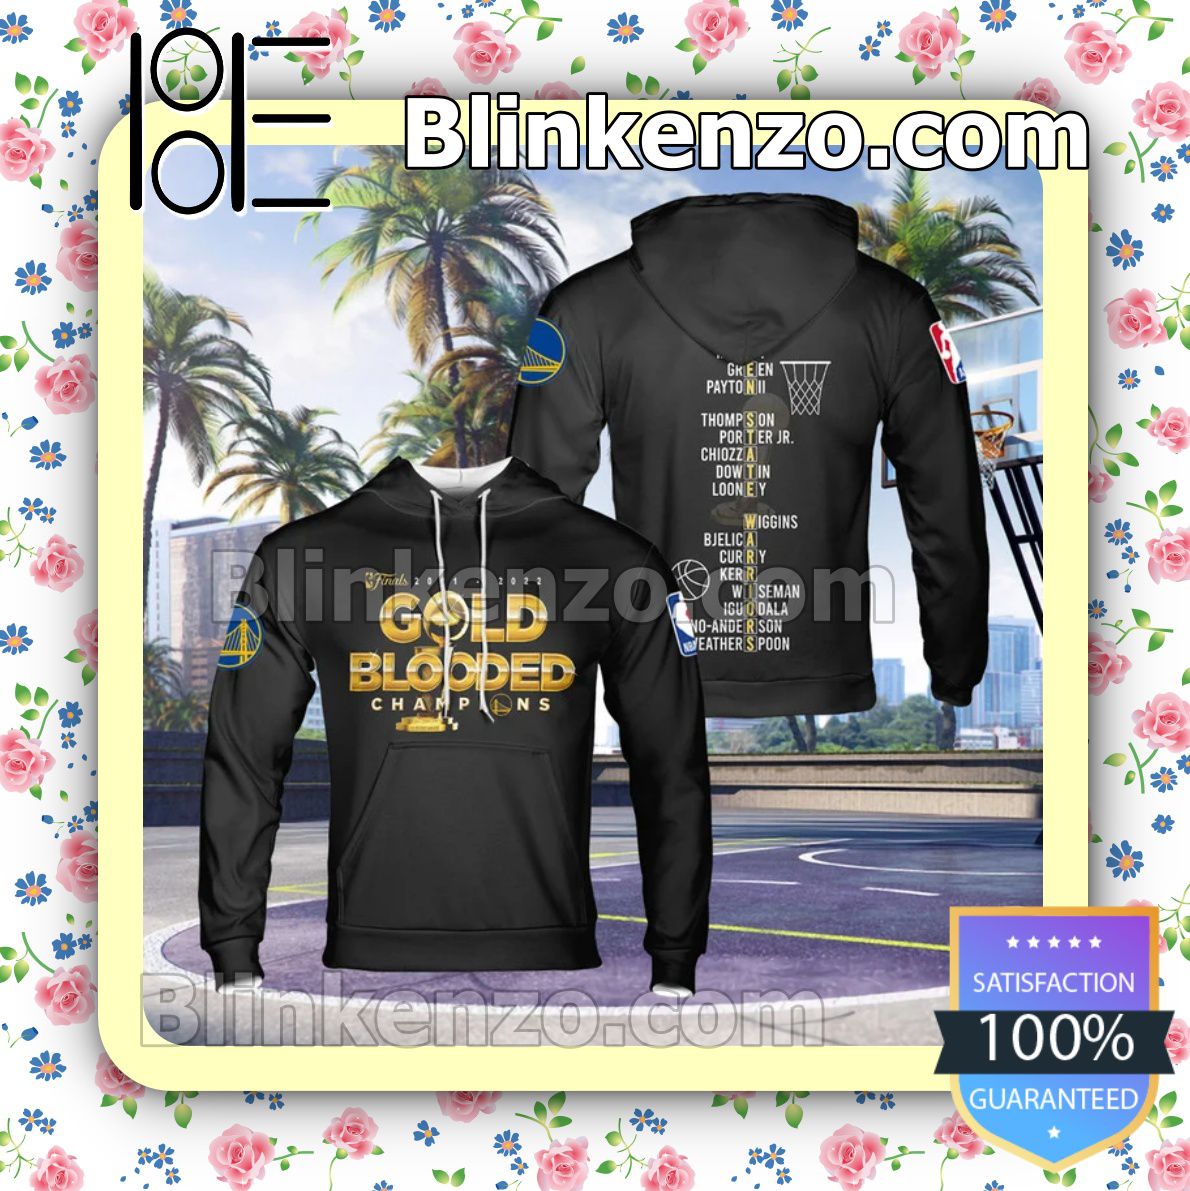 Present Finals 2021-2022 Gold Blooded Champions Hoodies, Long Sleeve Shirt